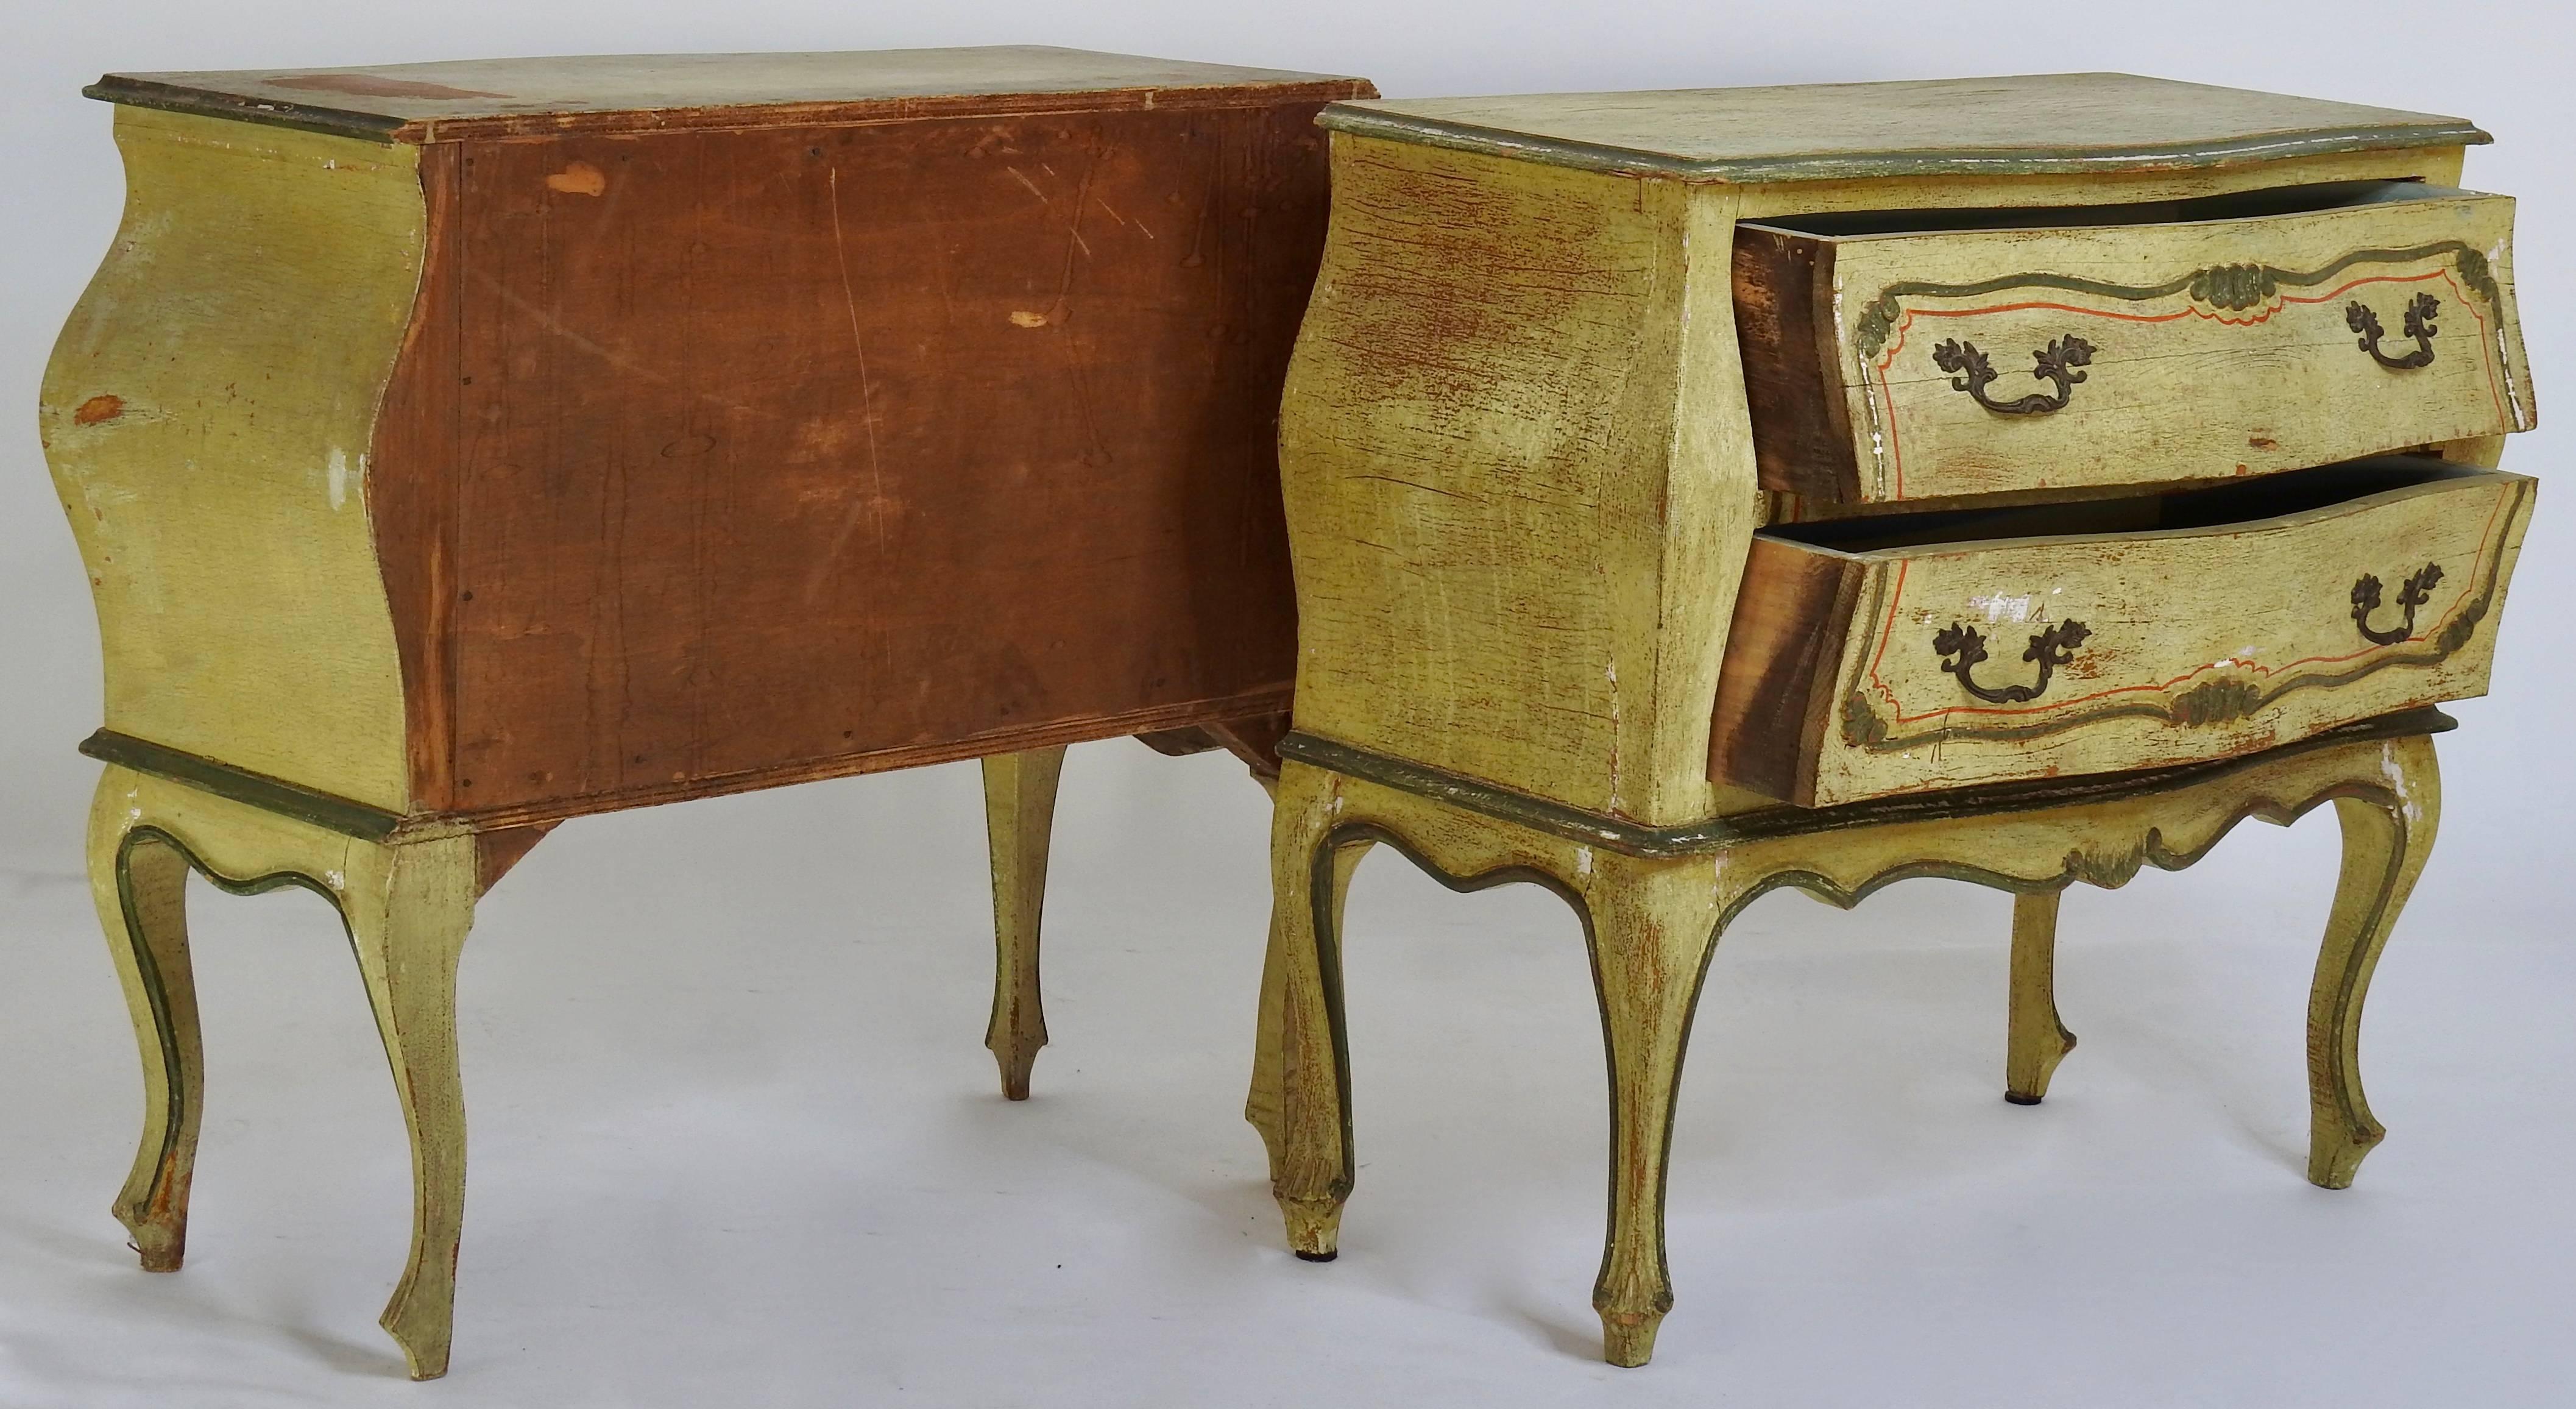 Shades of yellow, green and terra cotta adorn this pair of Bombay Chests from Italy. Each have two pull-out drawers with ornate brass pulls. Finish is hand-painted.